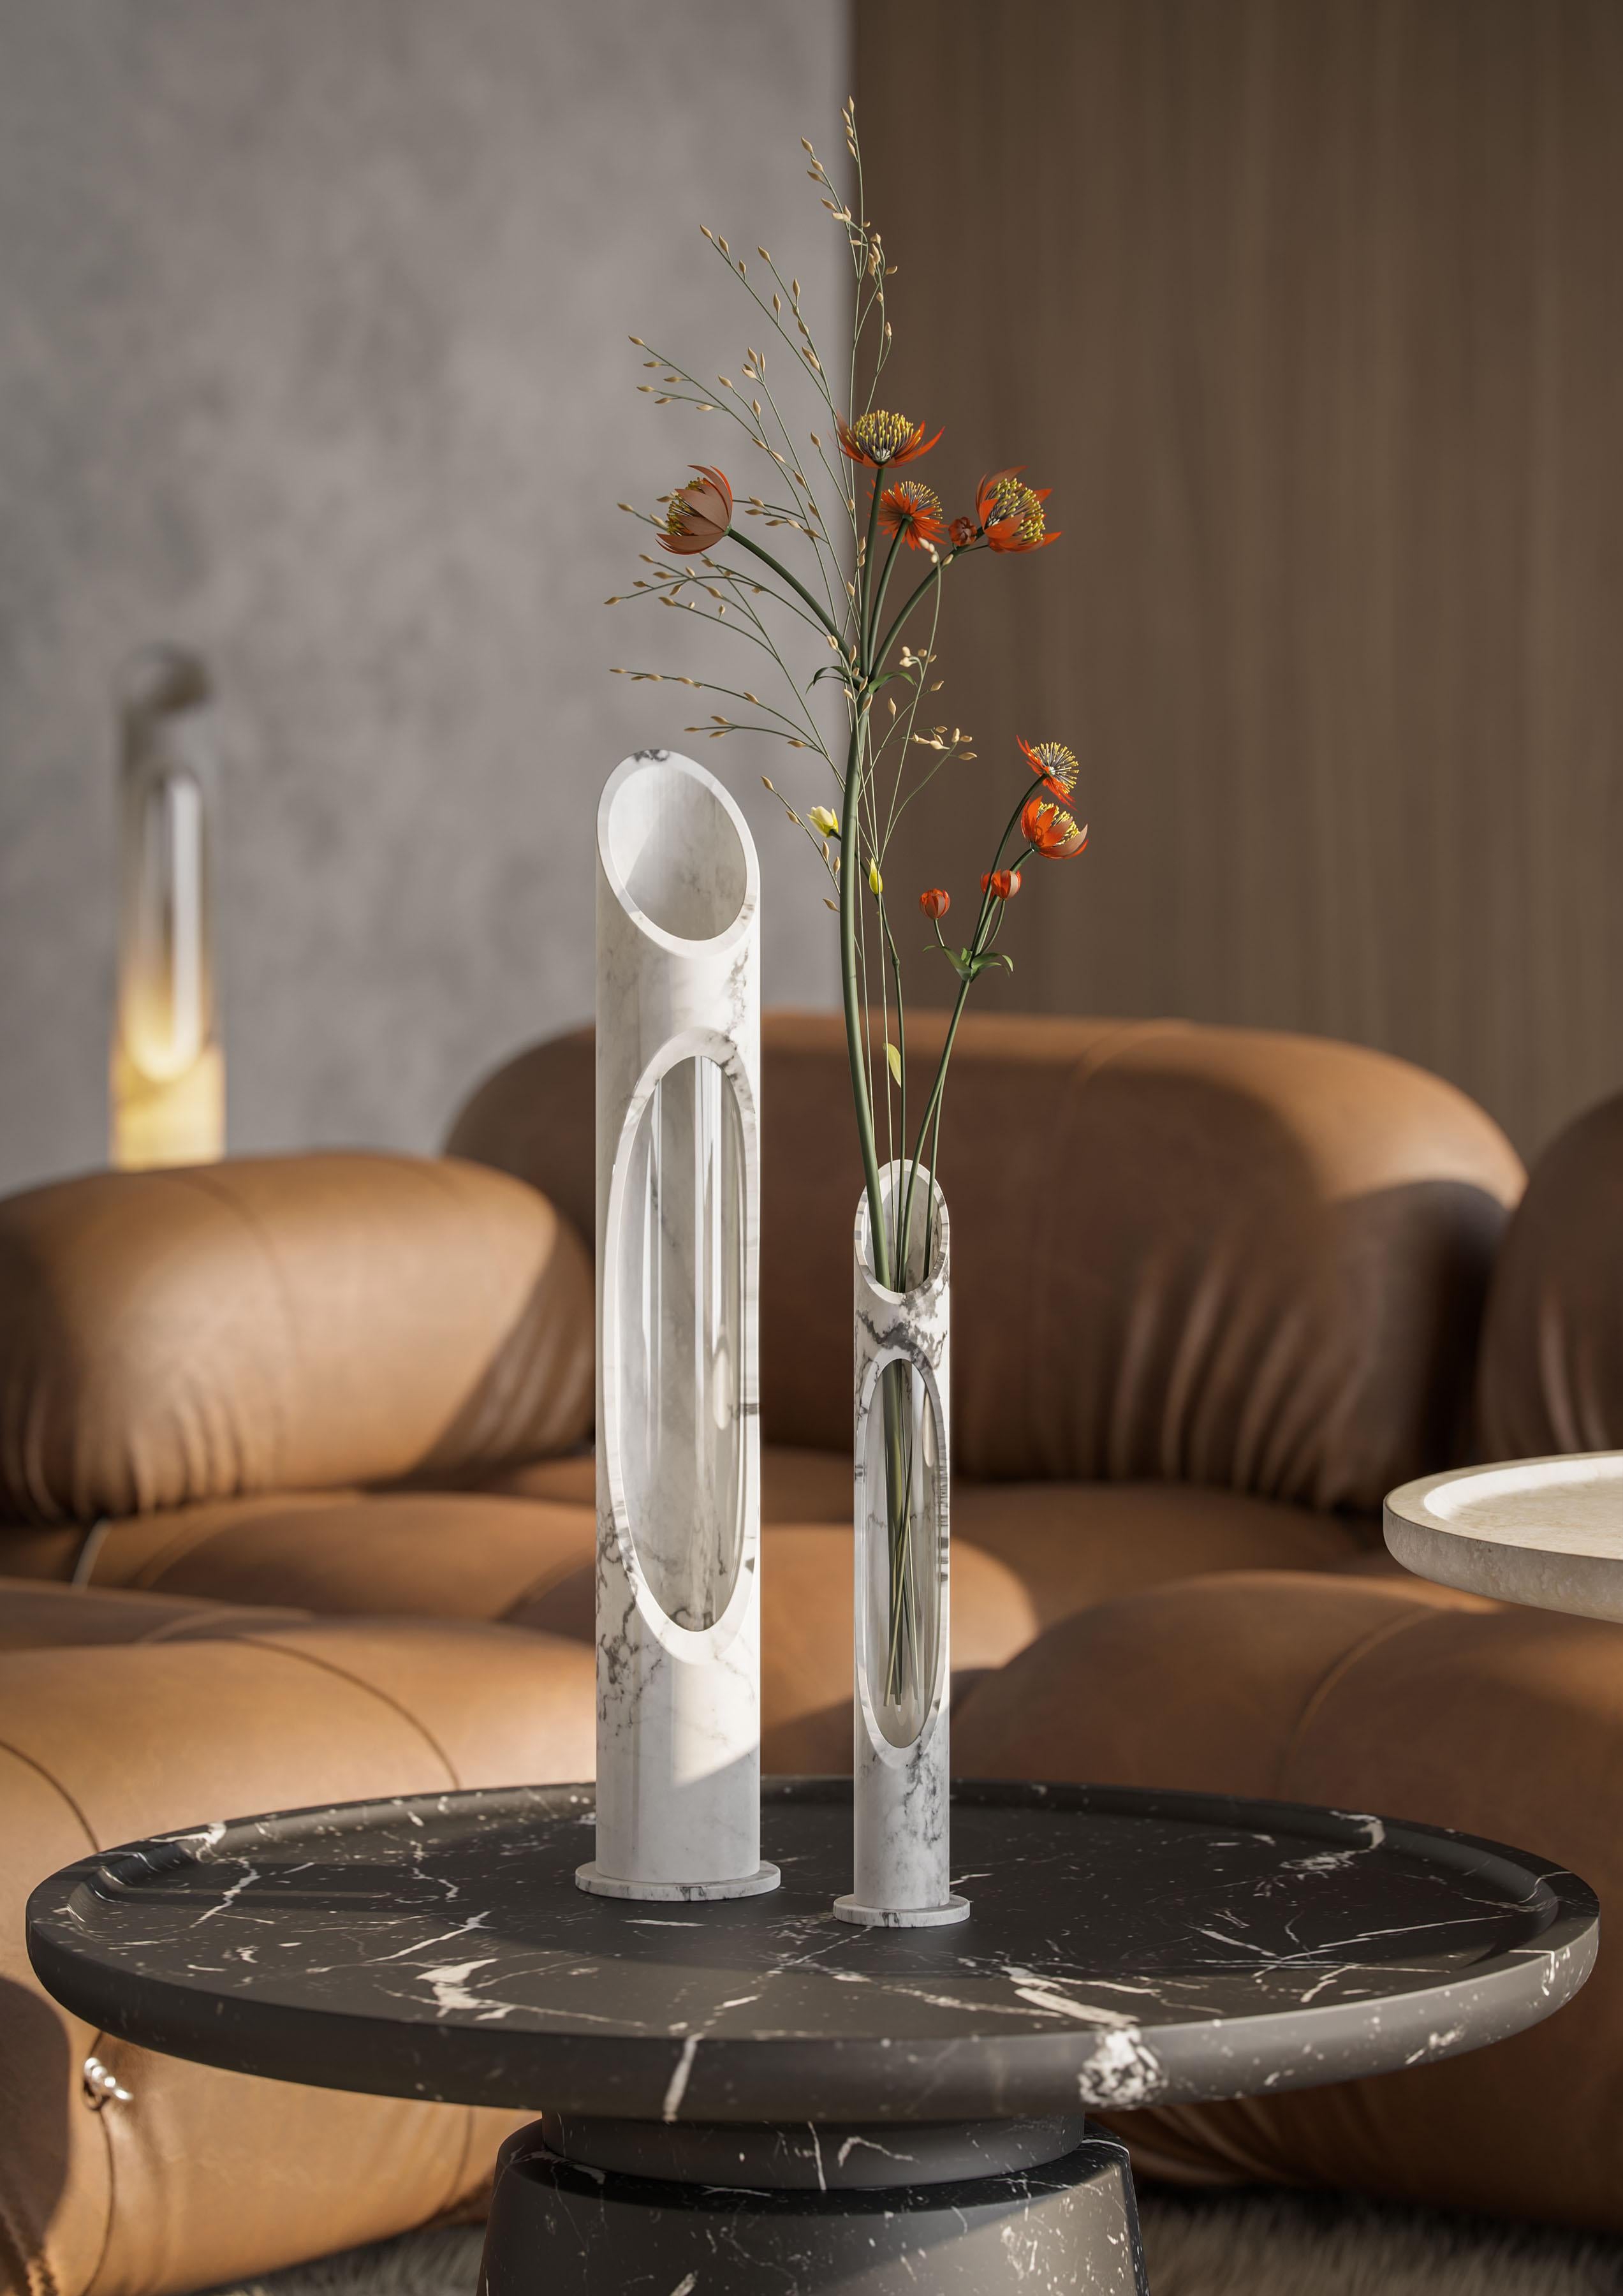 Vase L in White Arabescato marble, designed by Jacopo Simonetti.
Available also in Pink Egeo, Black Marquinia, White Onyx marble and in the S version. 

Armonia Collection: Inspired by the captivating image that two contrasting elements can